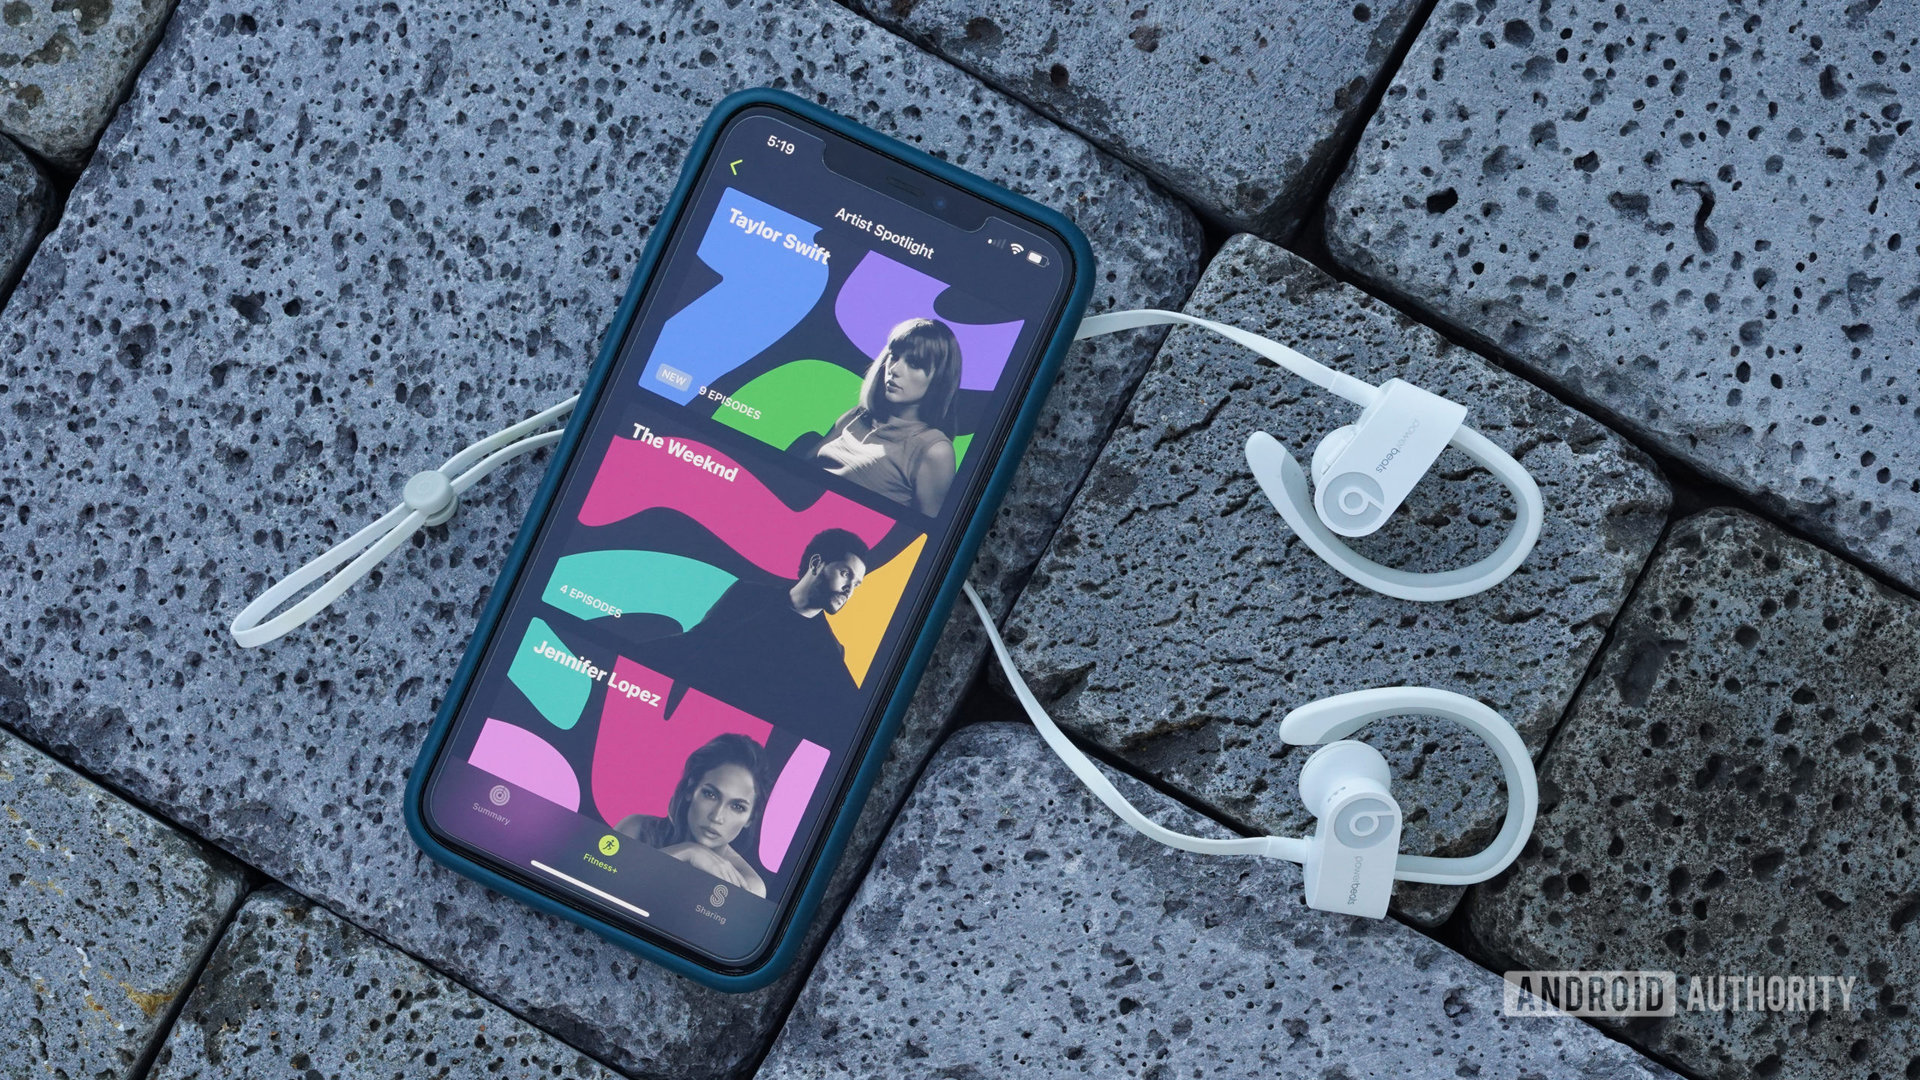 An iPhone displaying Artist Spotlight rests on a brick path along with a pair of wireless headphones.